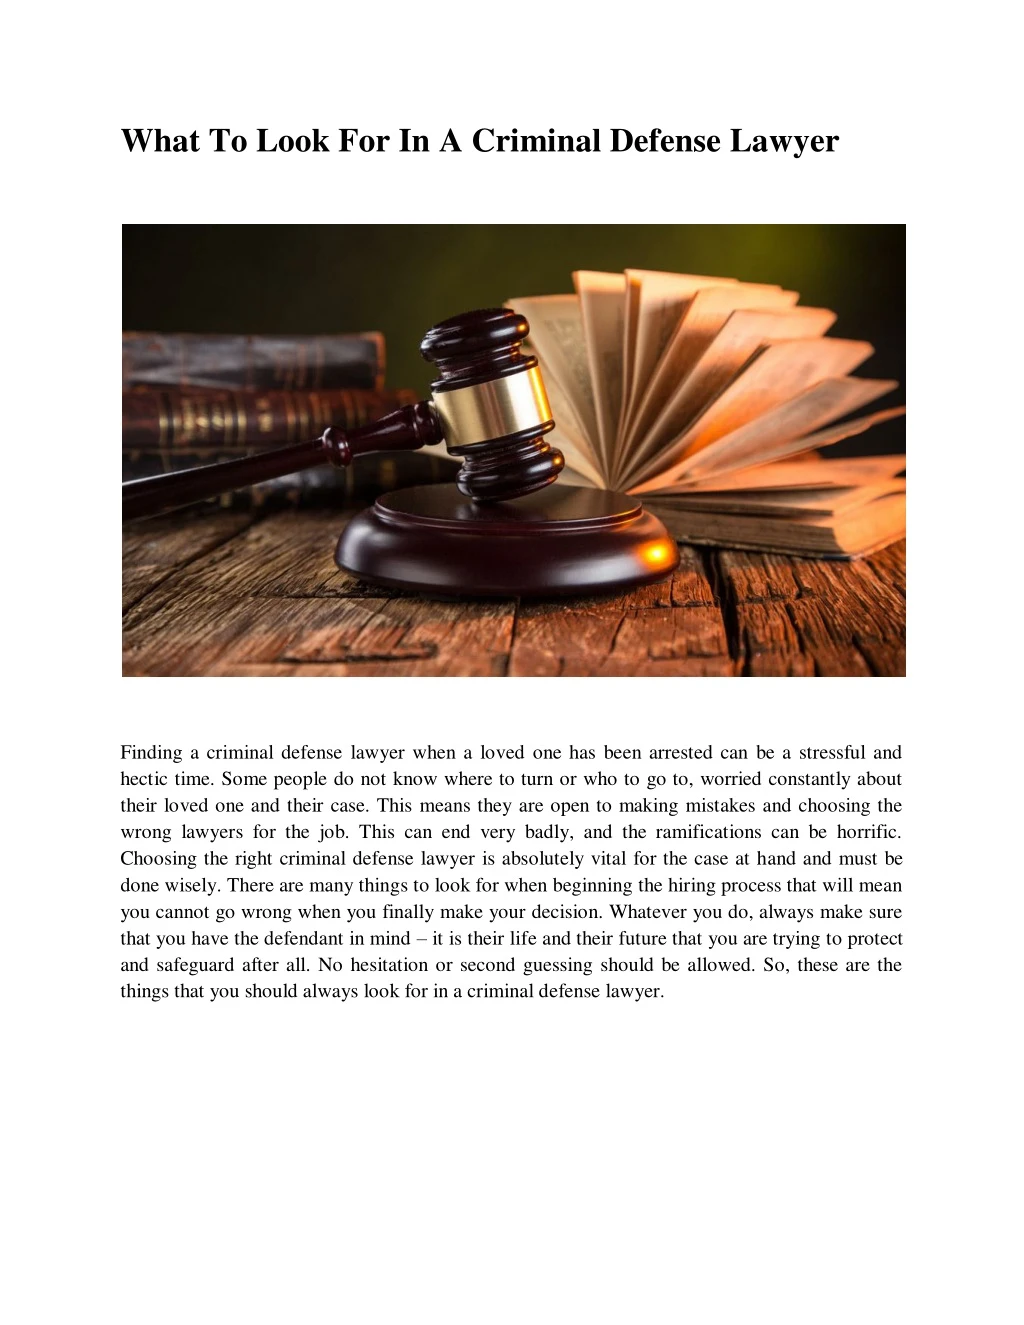 what to look for in a criminal defense lawyer